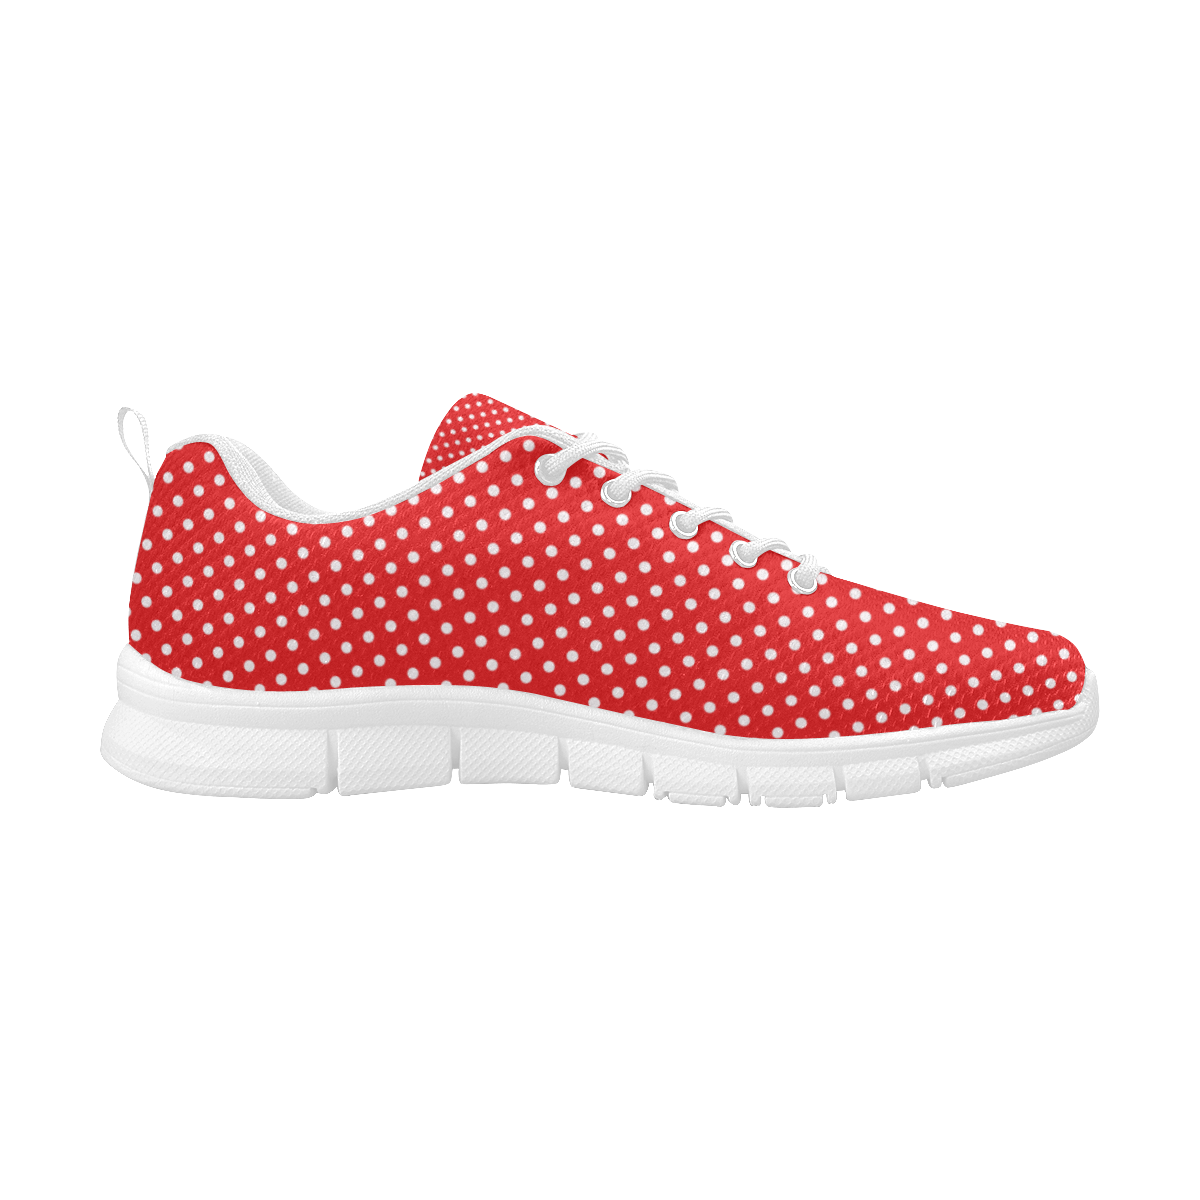 Red polka dots Women's Breathable Running Shoes/Large (Model 055)